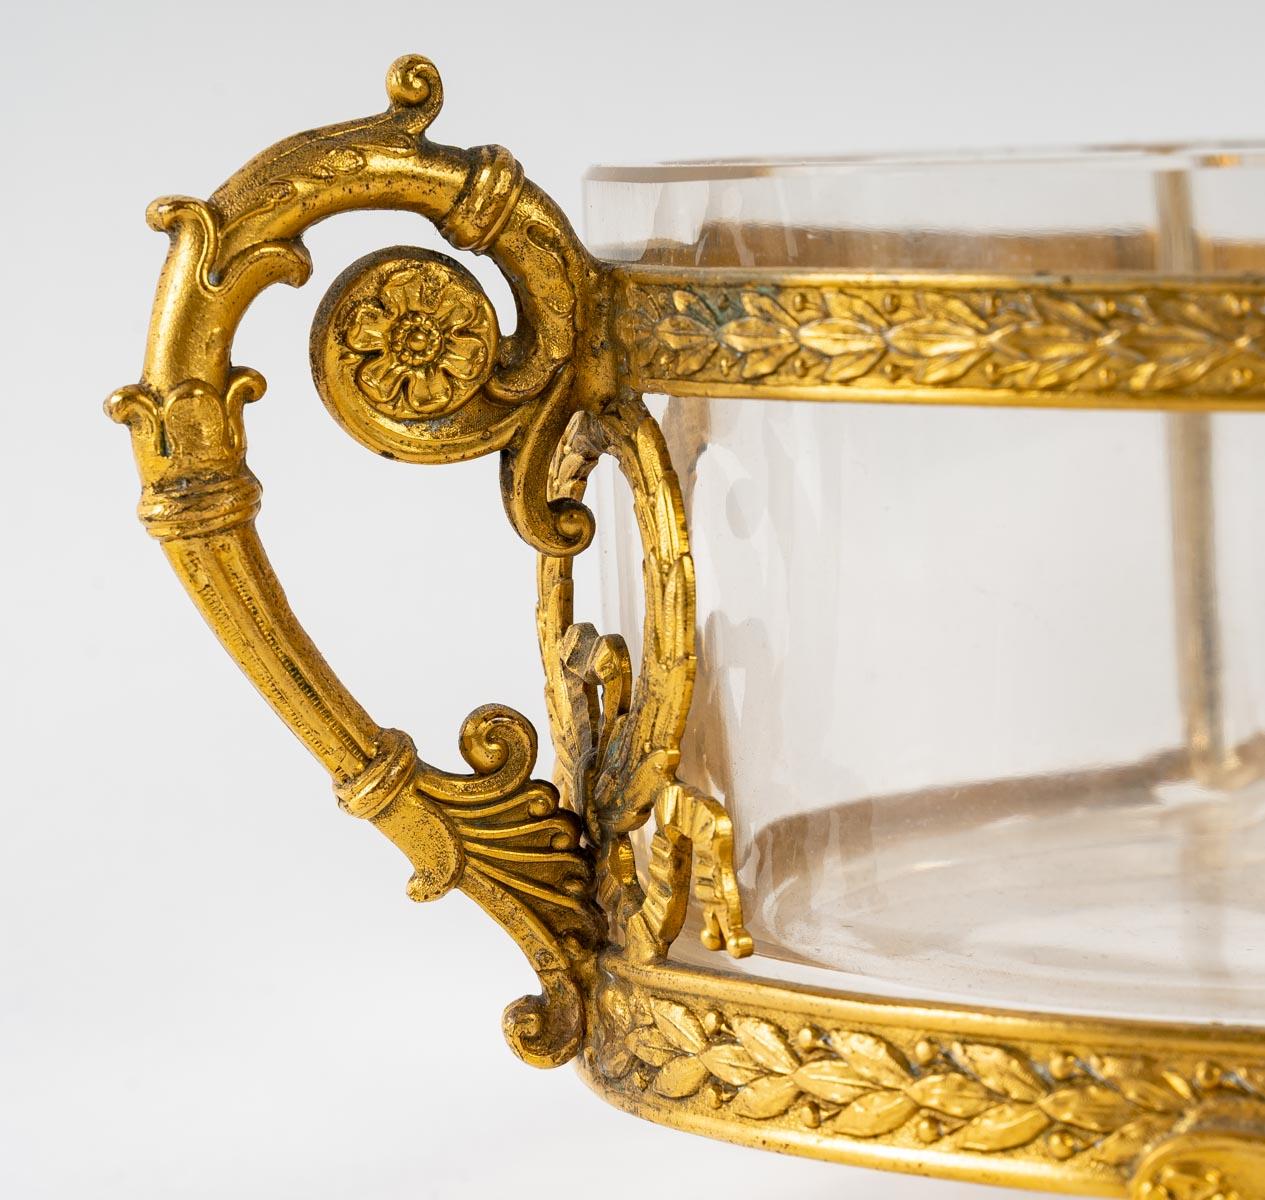 Crystal bowl, Empire style
A crystal and gilt bronze bowl, Empire style, 19th century.
Measures: H: 11 cm, W: 37 cm, D: 17 cm.
    